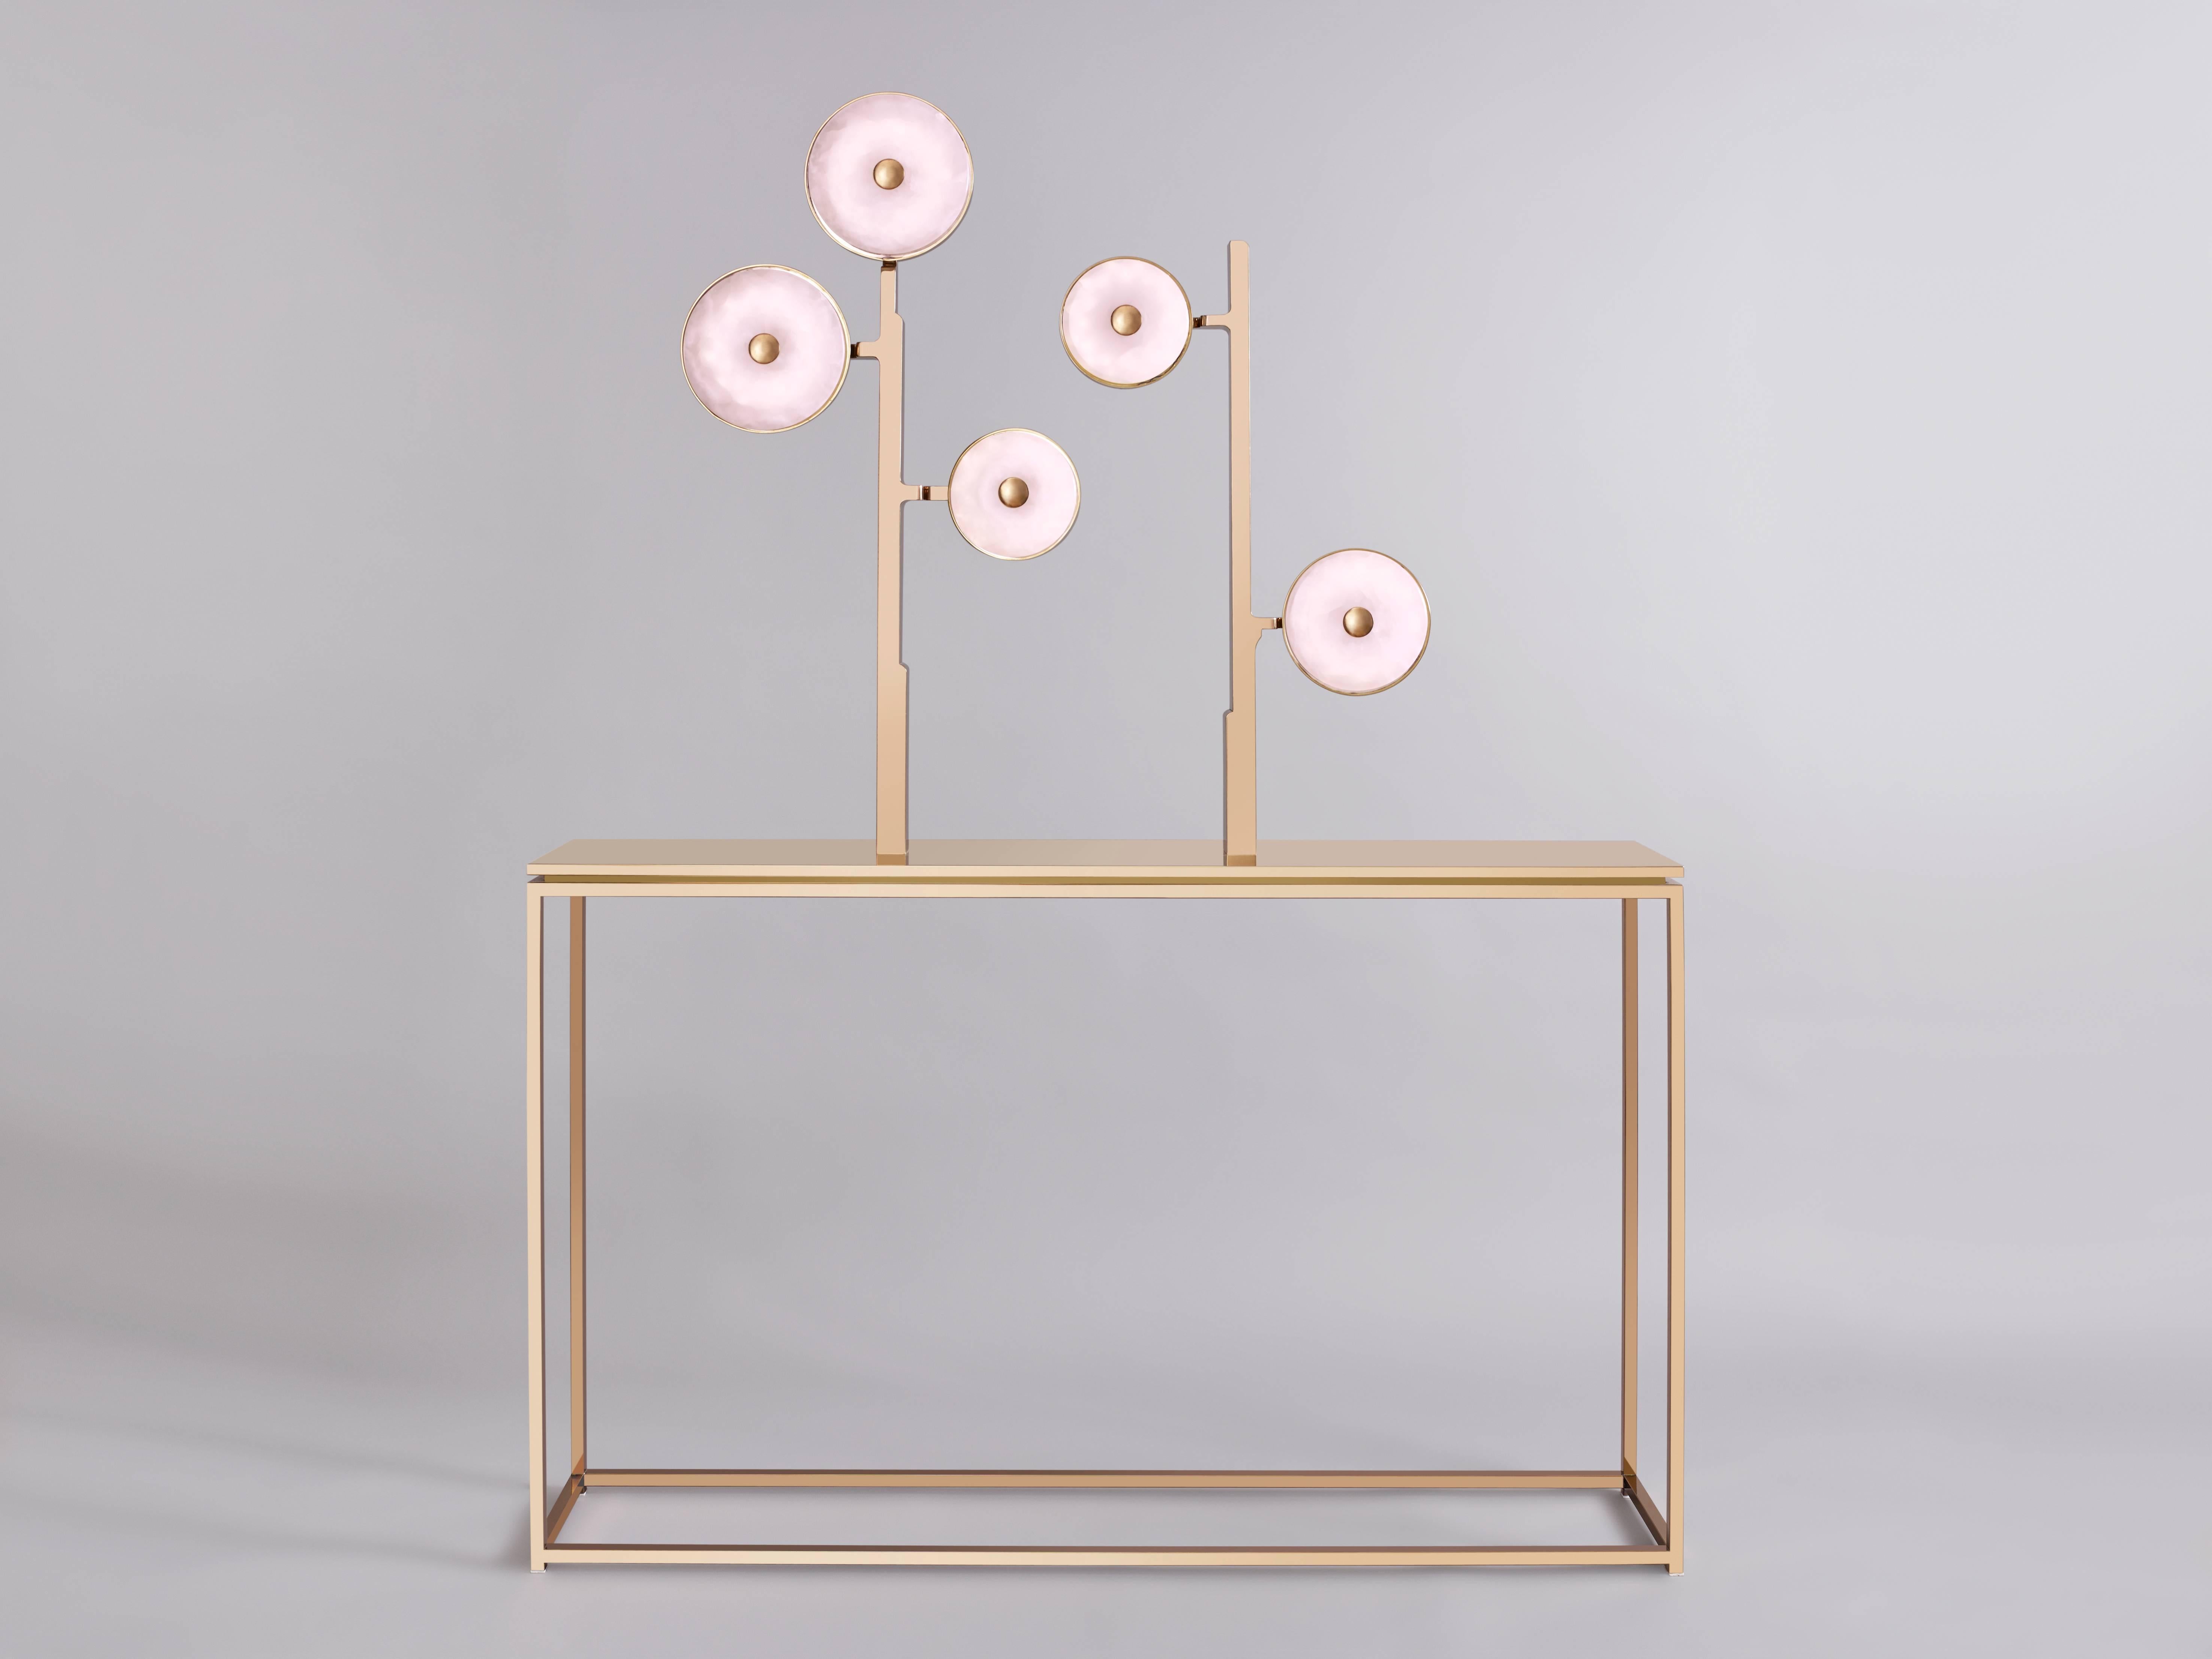 This 'JinShi Pink Jade' glamorous luminous console by acclaimed design duo Studio MVW is a true jewel for the home. It encompasses five retro-lit heads in natural pink jade, an exceptional gemstone with a sumptuous powder transparency, and a